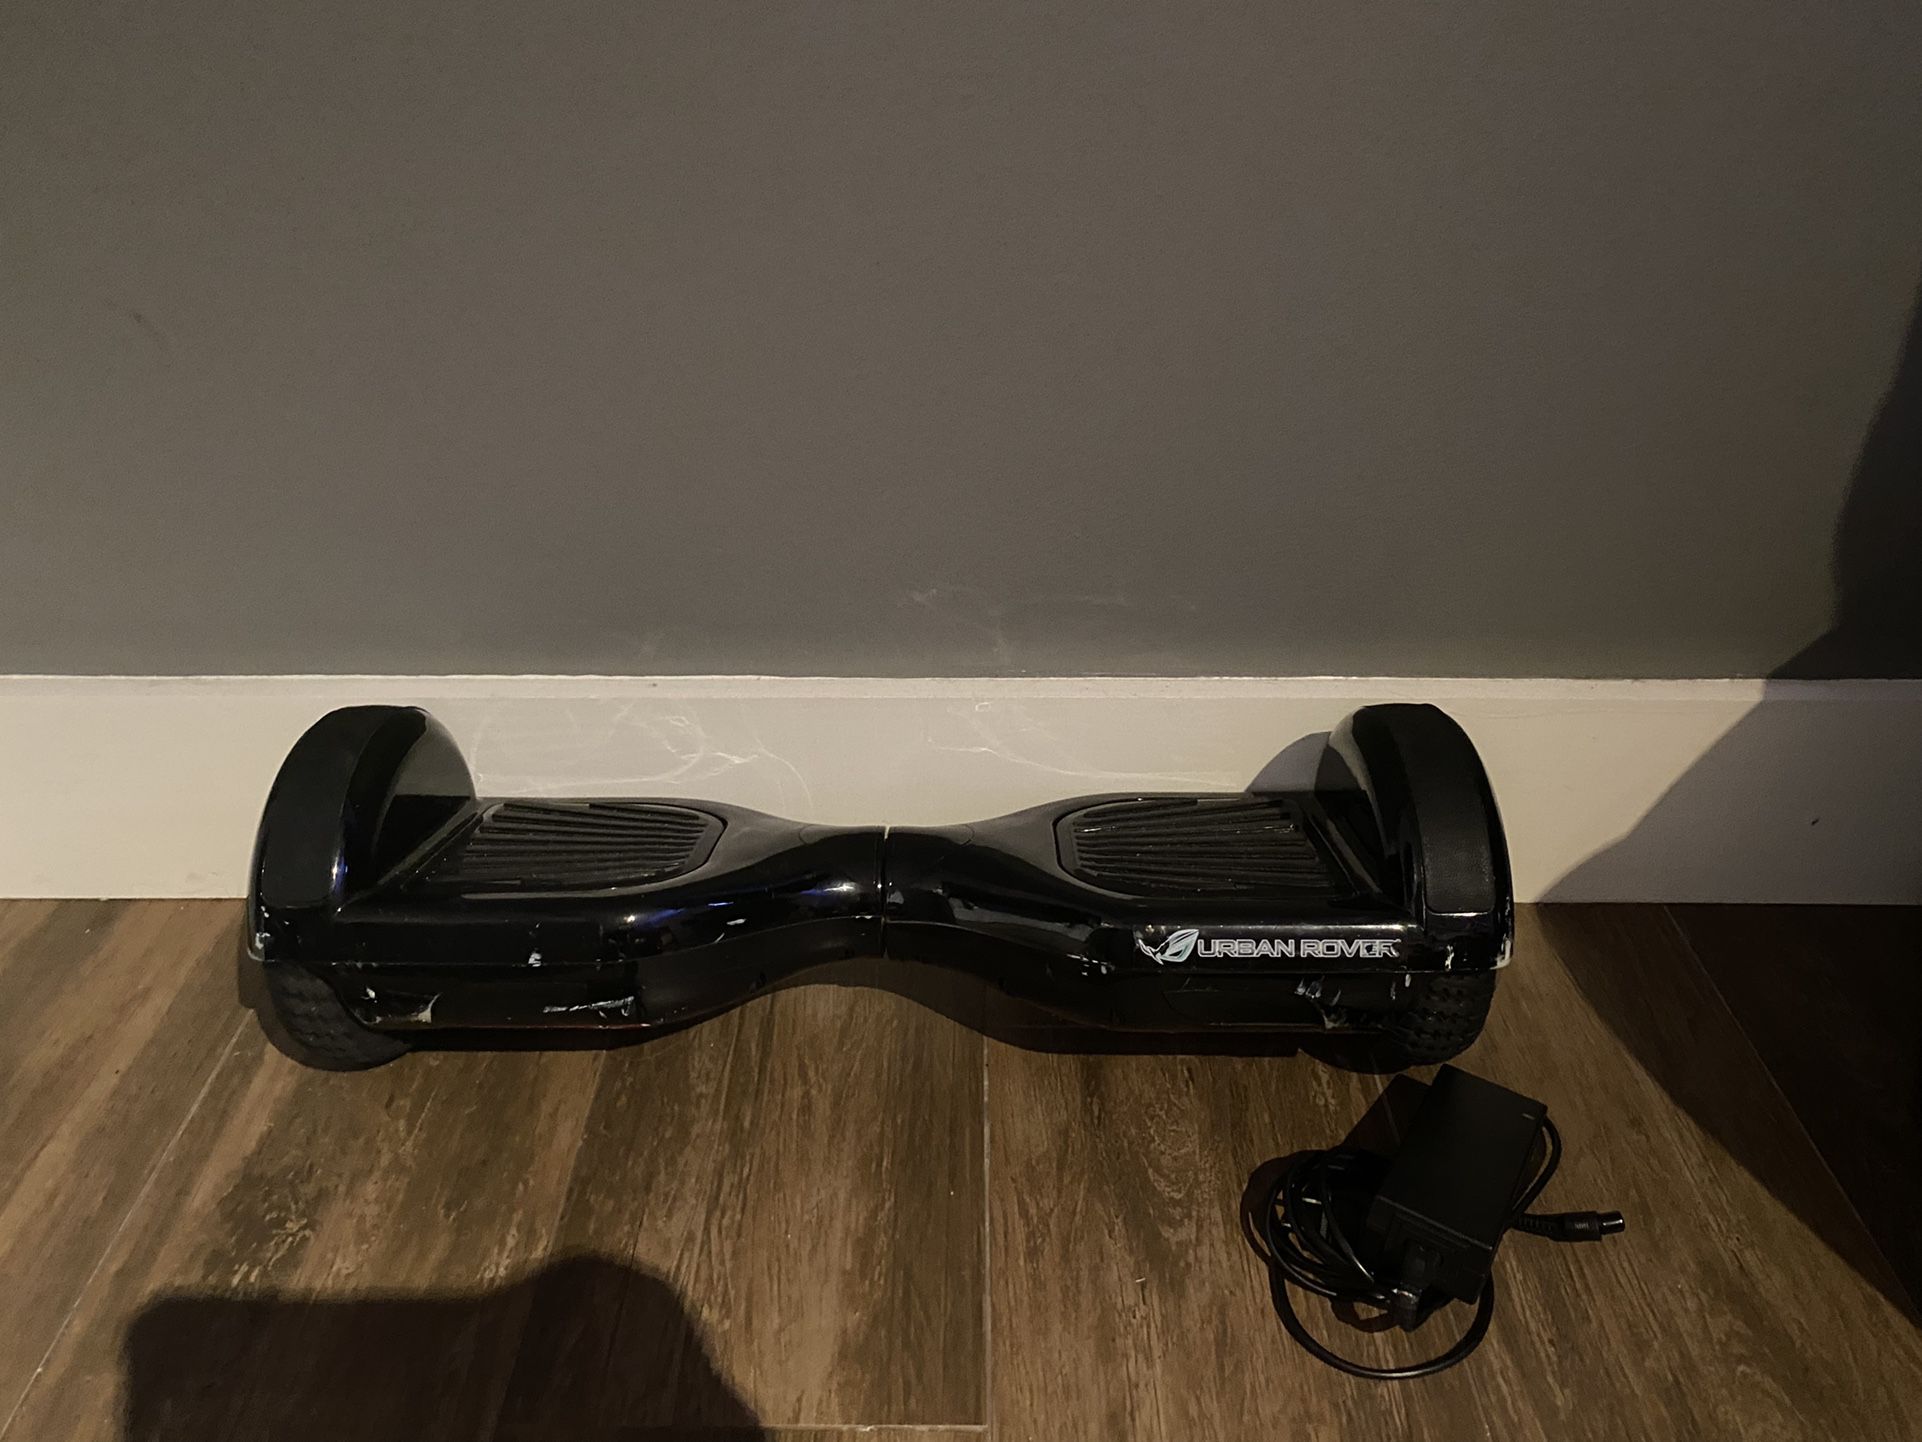 Hoverboard With Charger